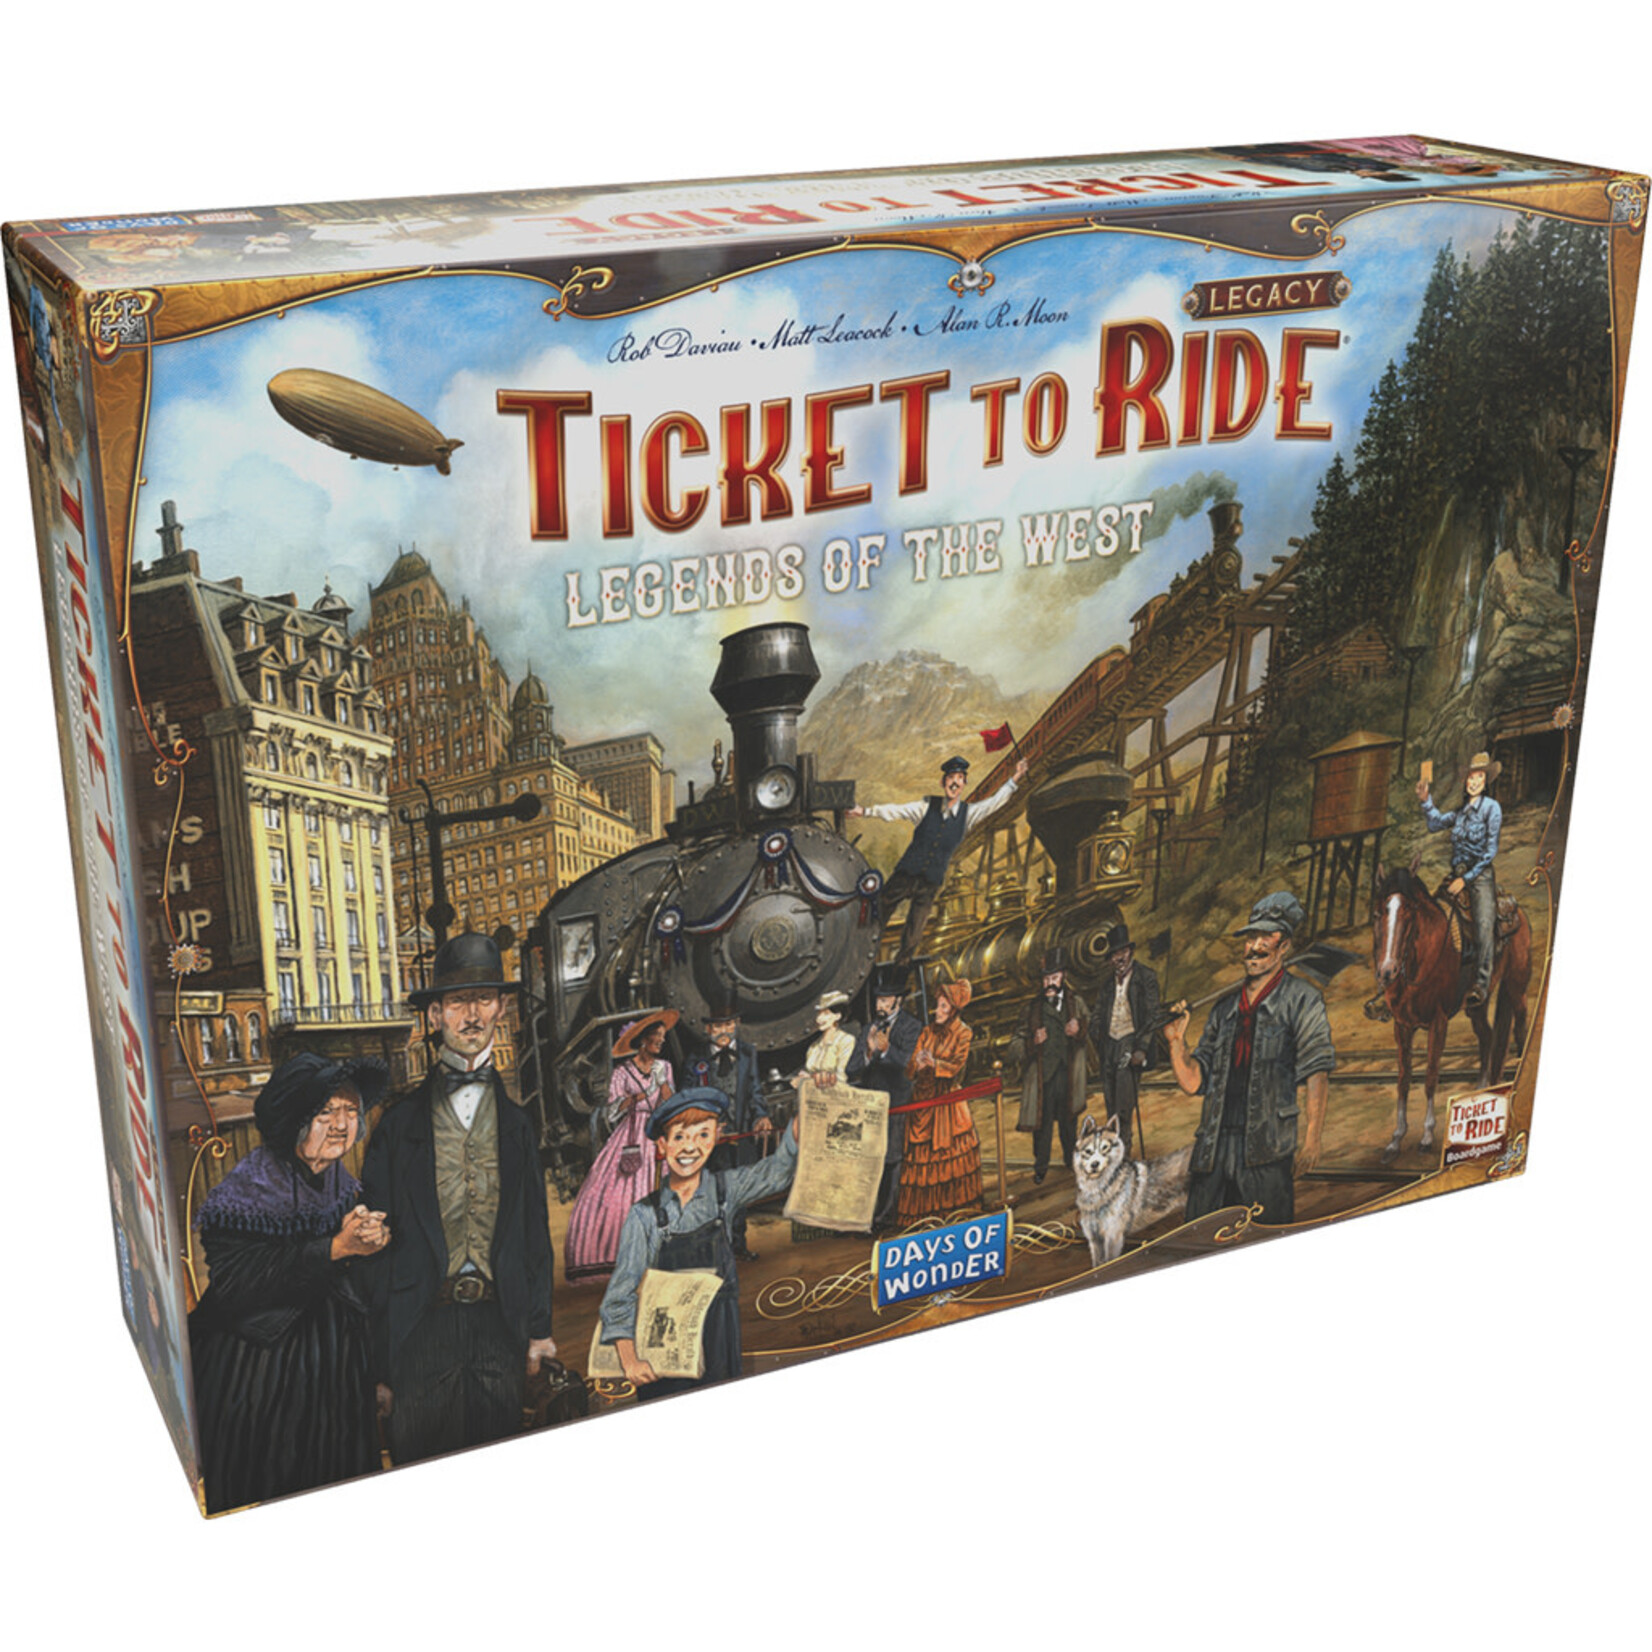 In Ticket to Ride Legacy: Legends of the West